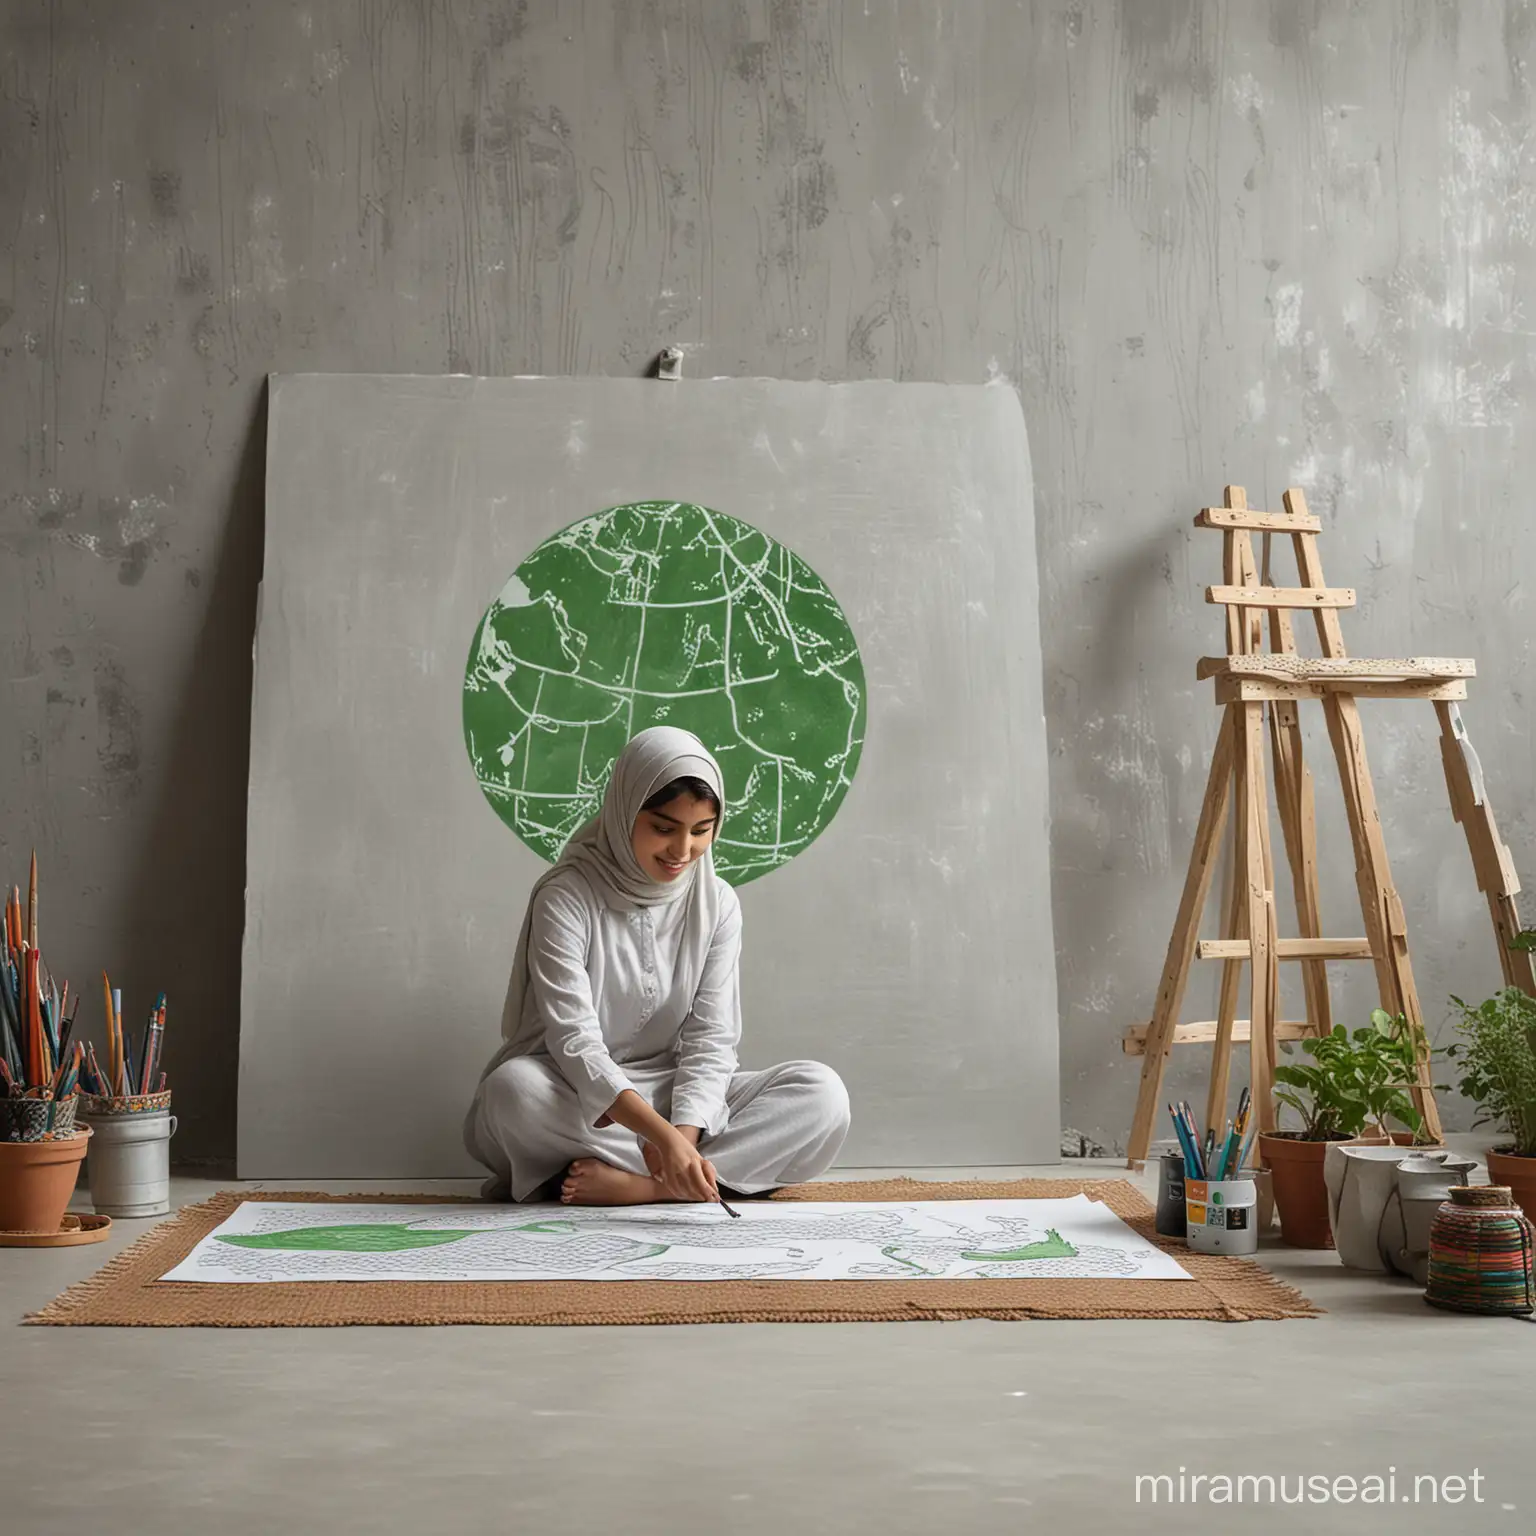 Muslim Girl Drawing in Studio with Green Planet and Gray Wall